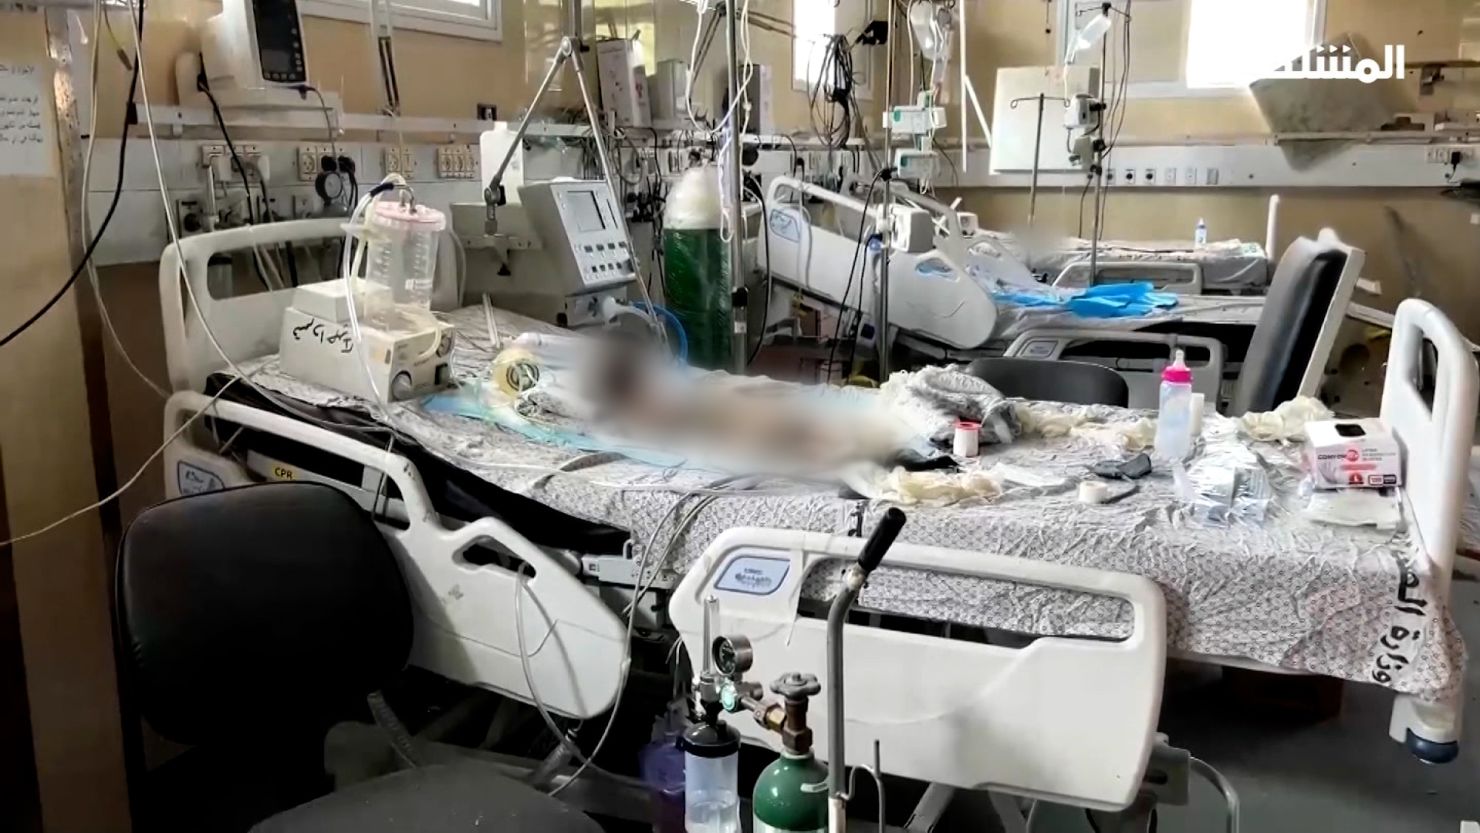 The bodies of decomposing babies are seen on hospital beds inside the Al-Nasr hospital ICU ward in northern Gaza, in this screen grab taken from a video filmed by Al Mashhad reporter Mohamed Baalousha, reportedly on November 27. The image has been blurred due to its graphic nature.